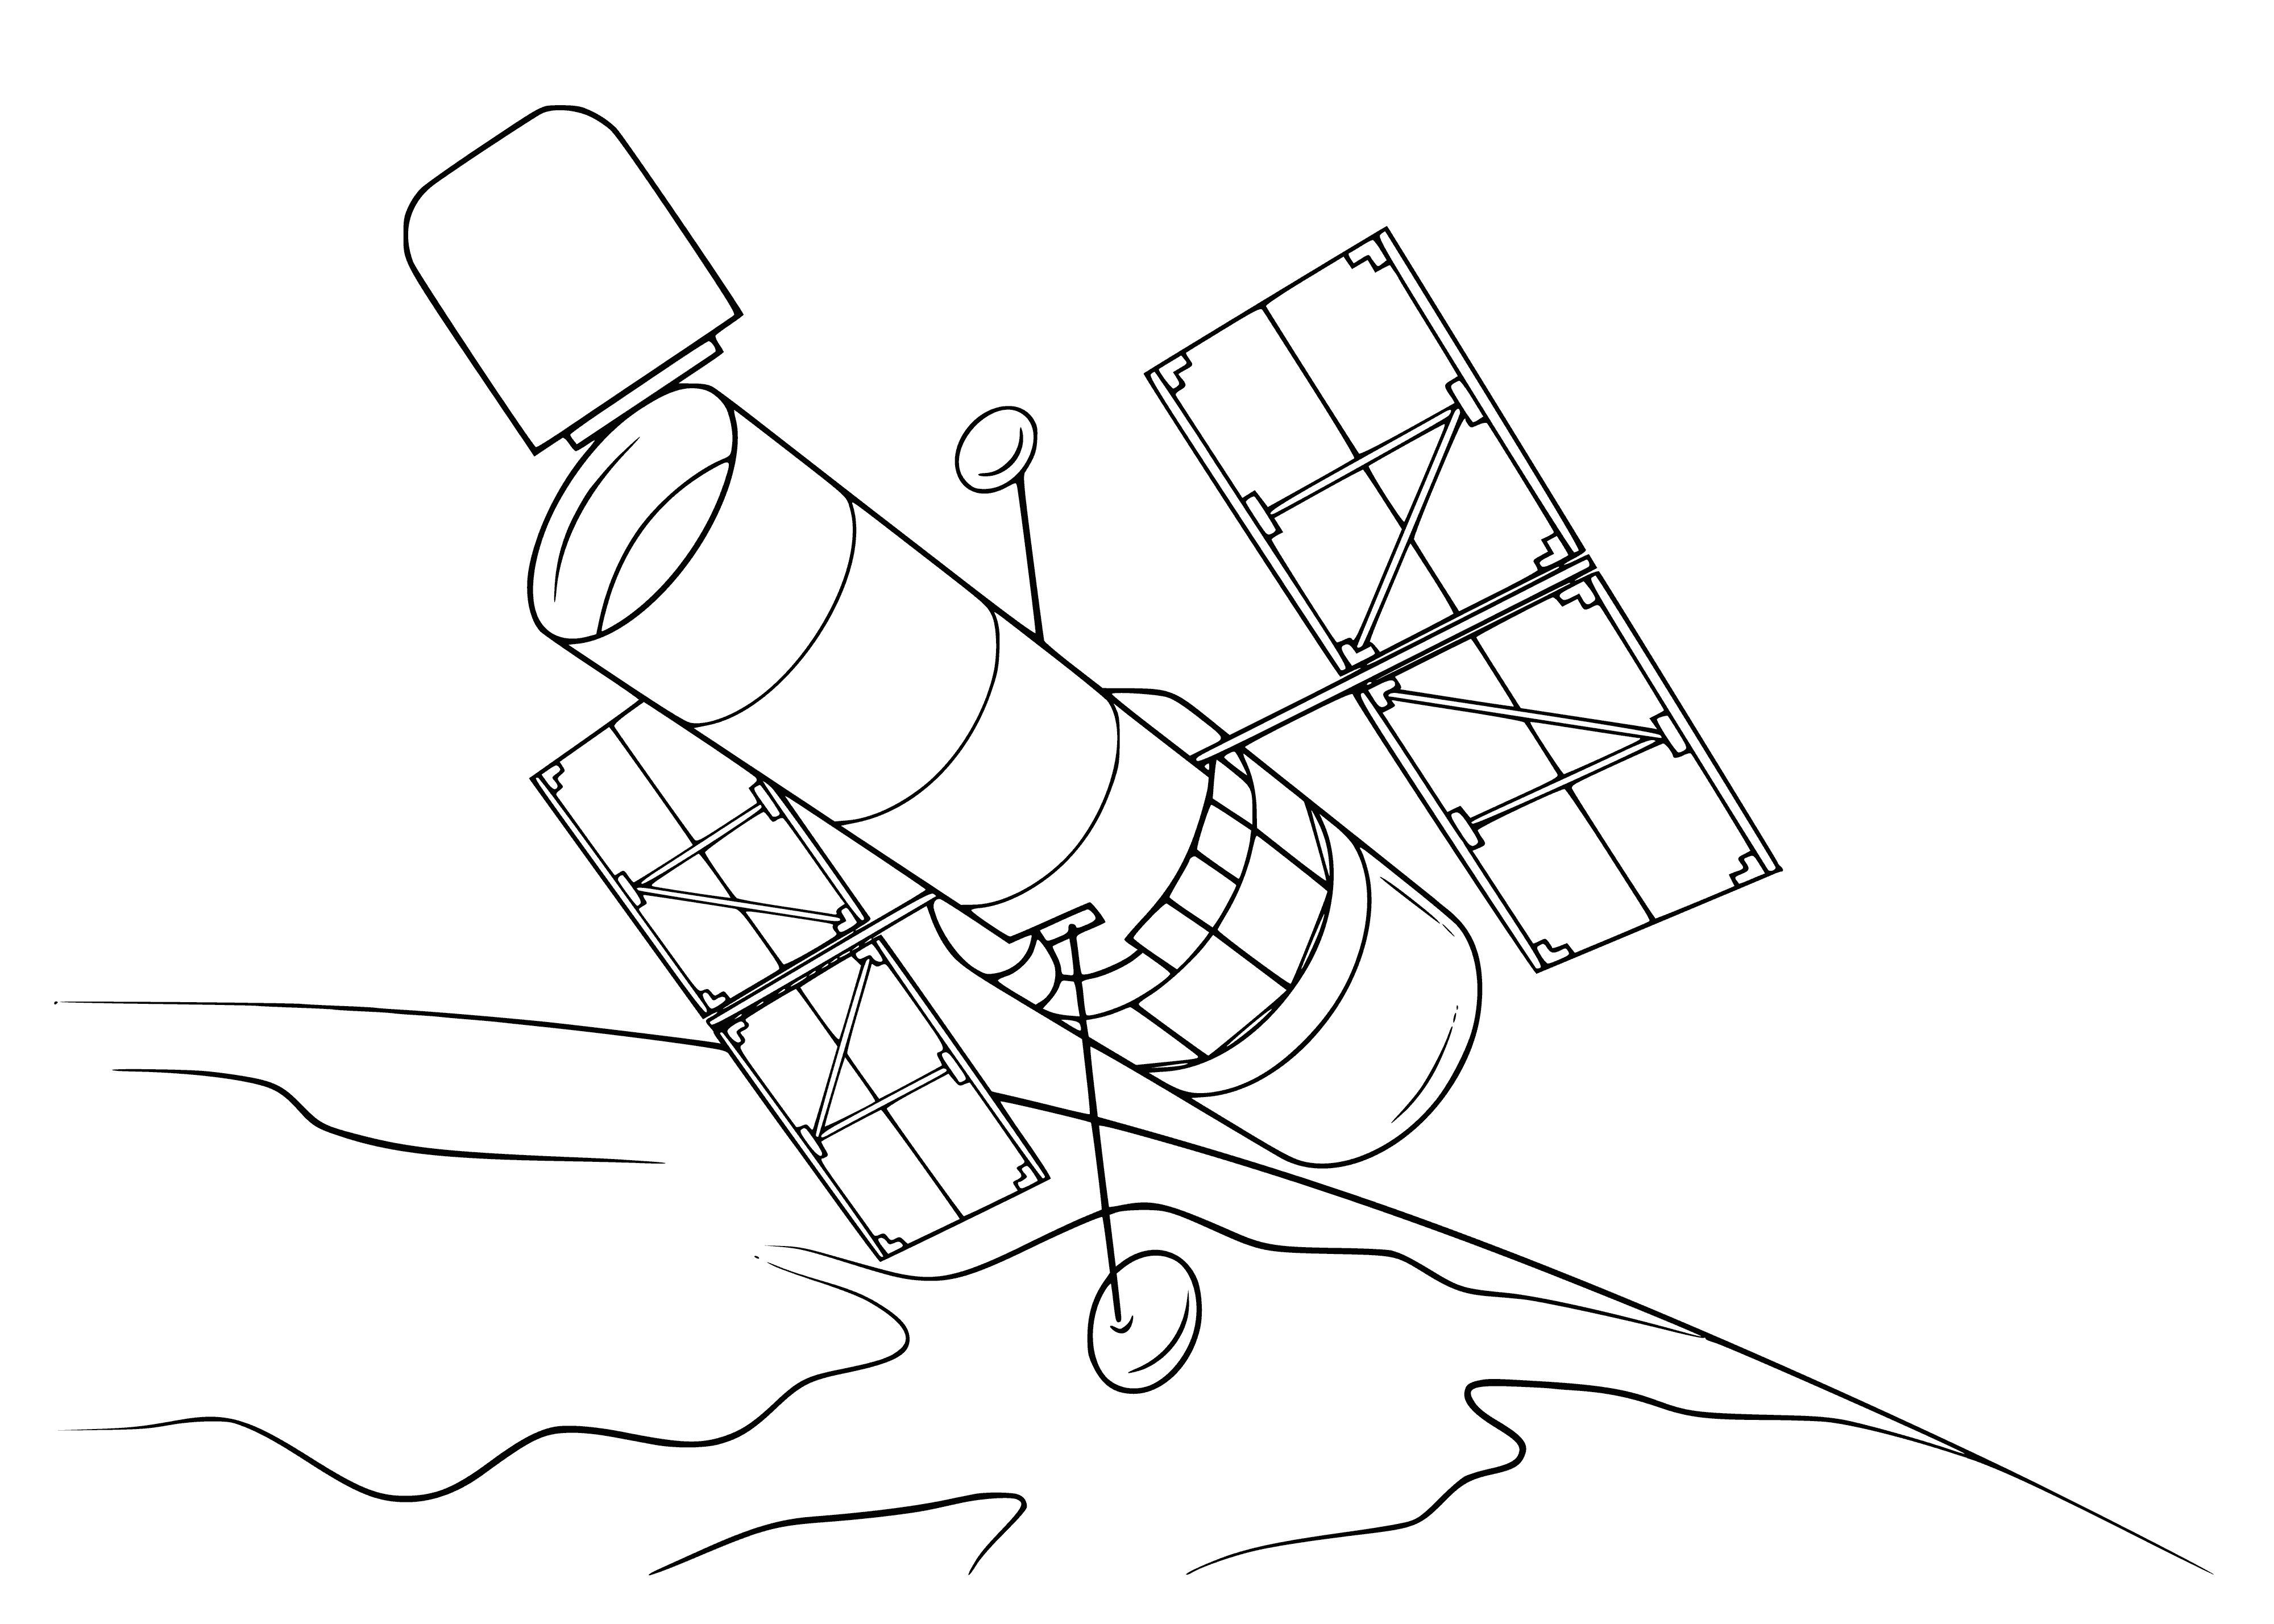 Orbital station coloring page